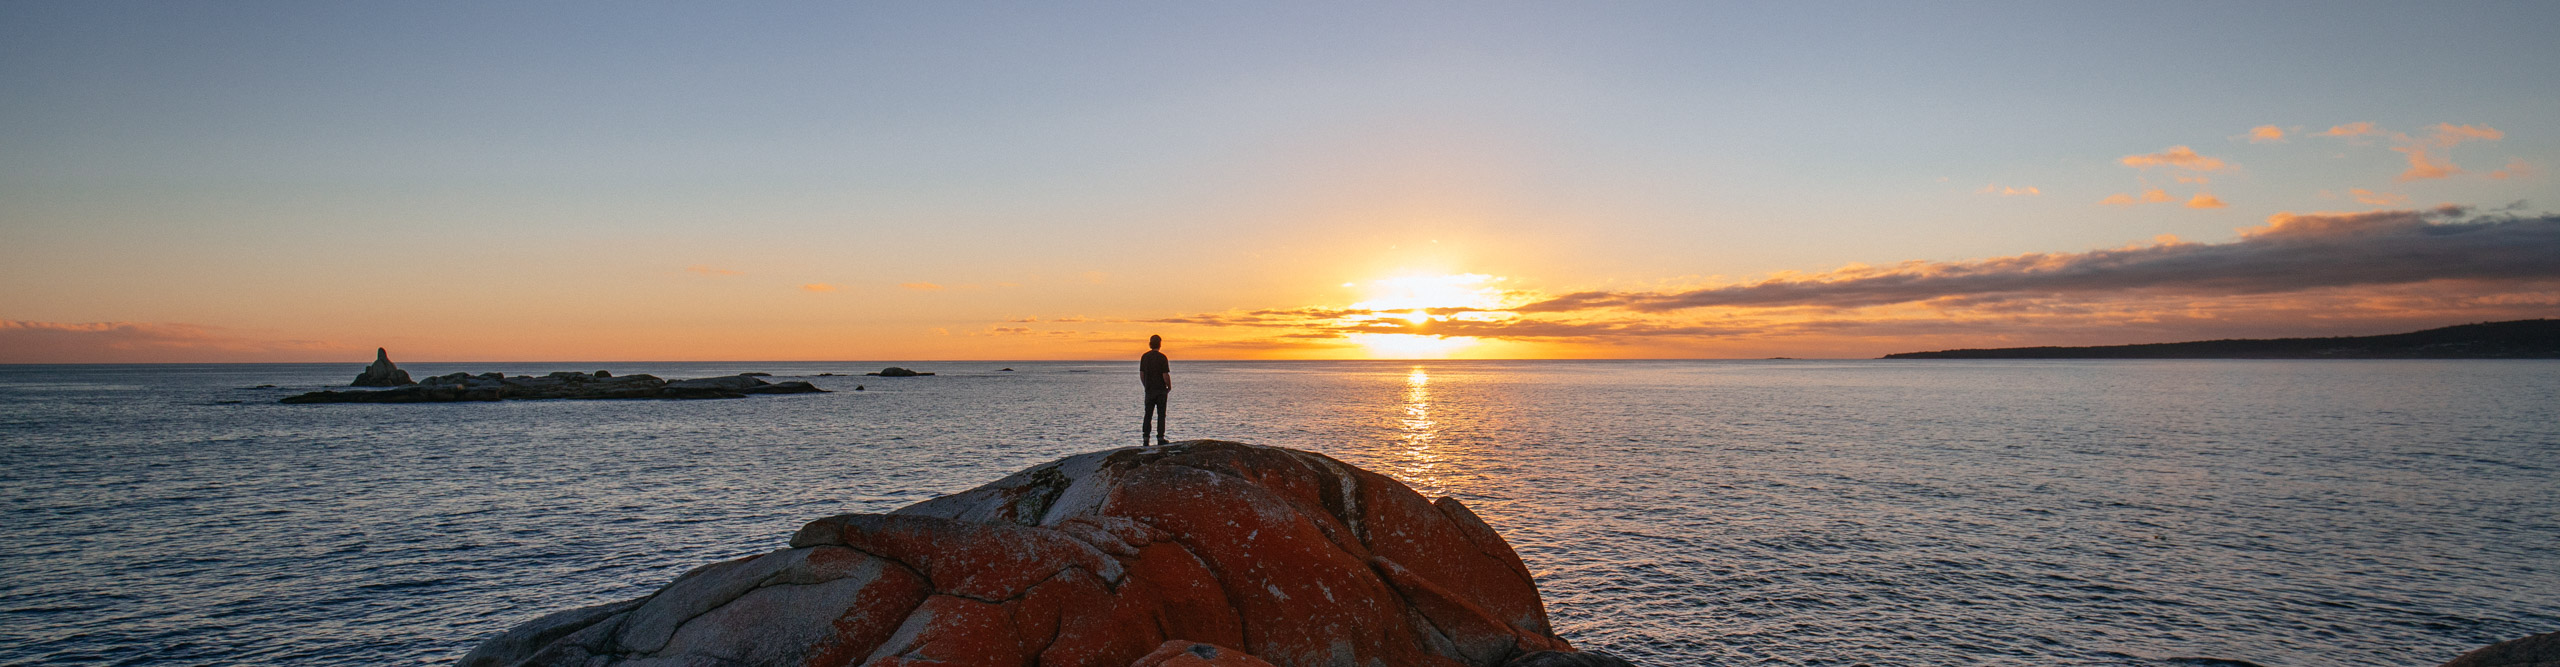 Traveller looking at the sunset from the rock of the Bay Of Fires, Tasmania, Australia 